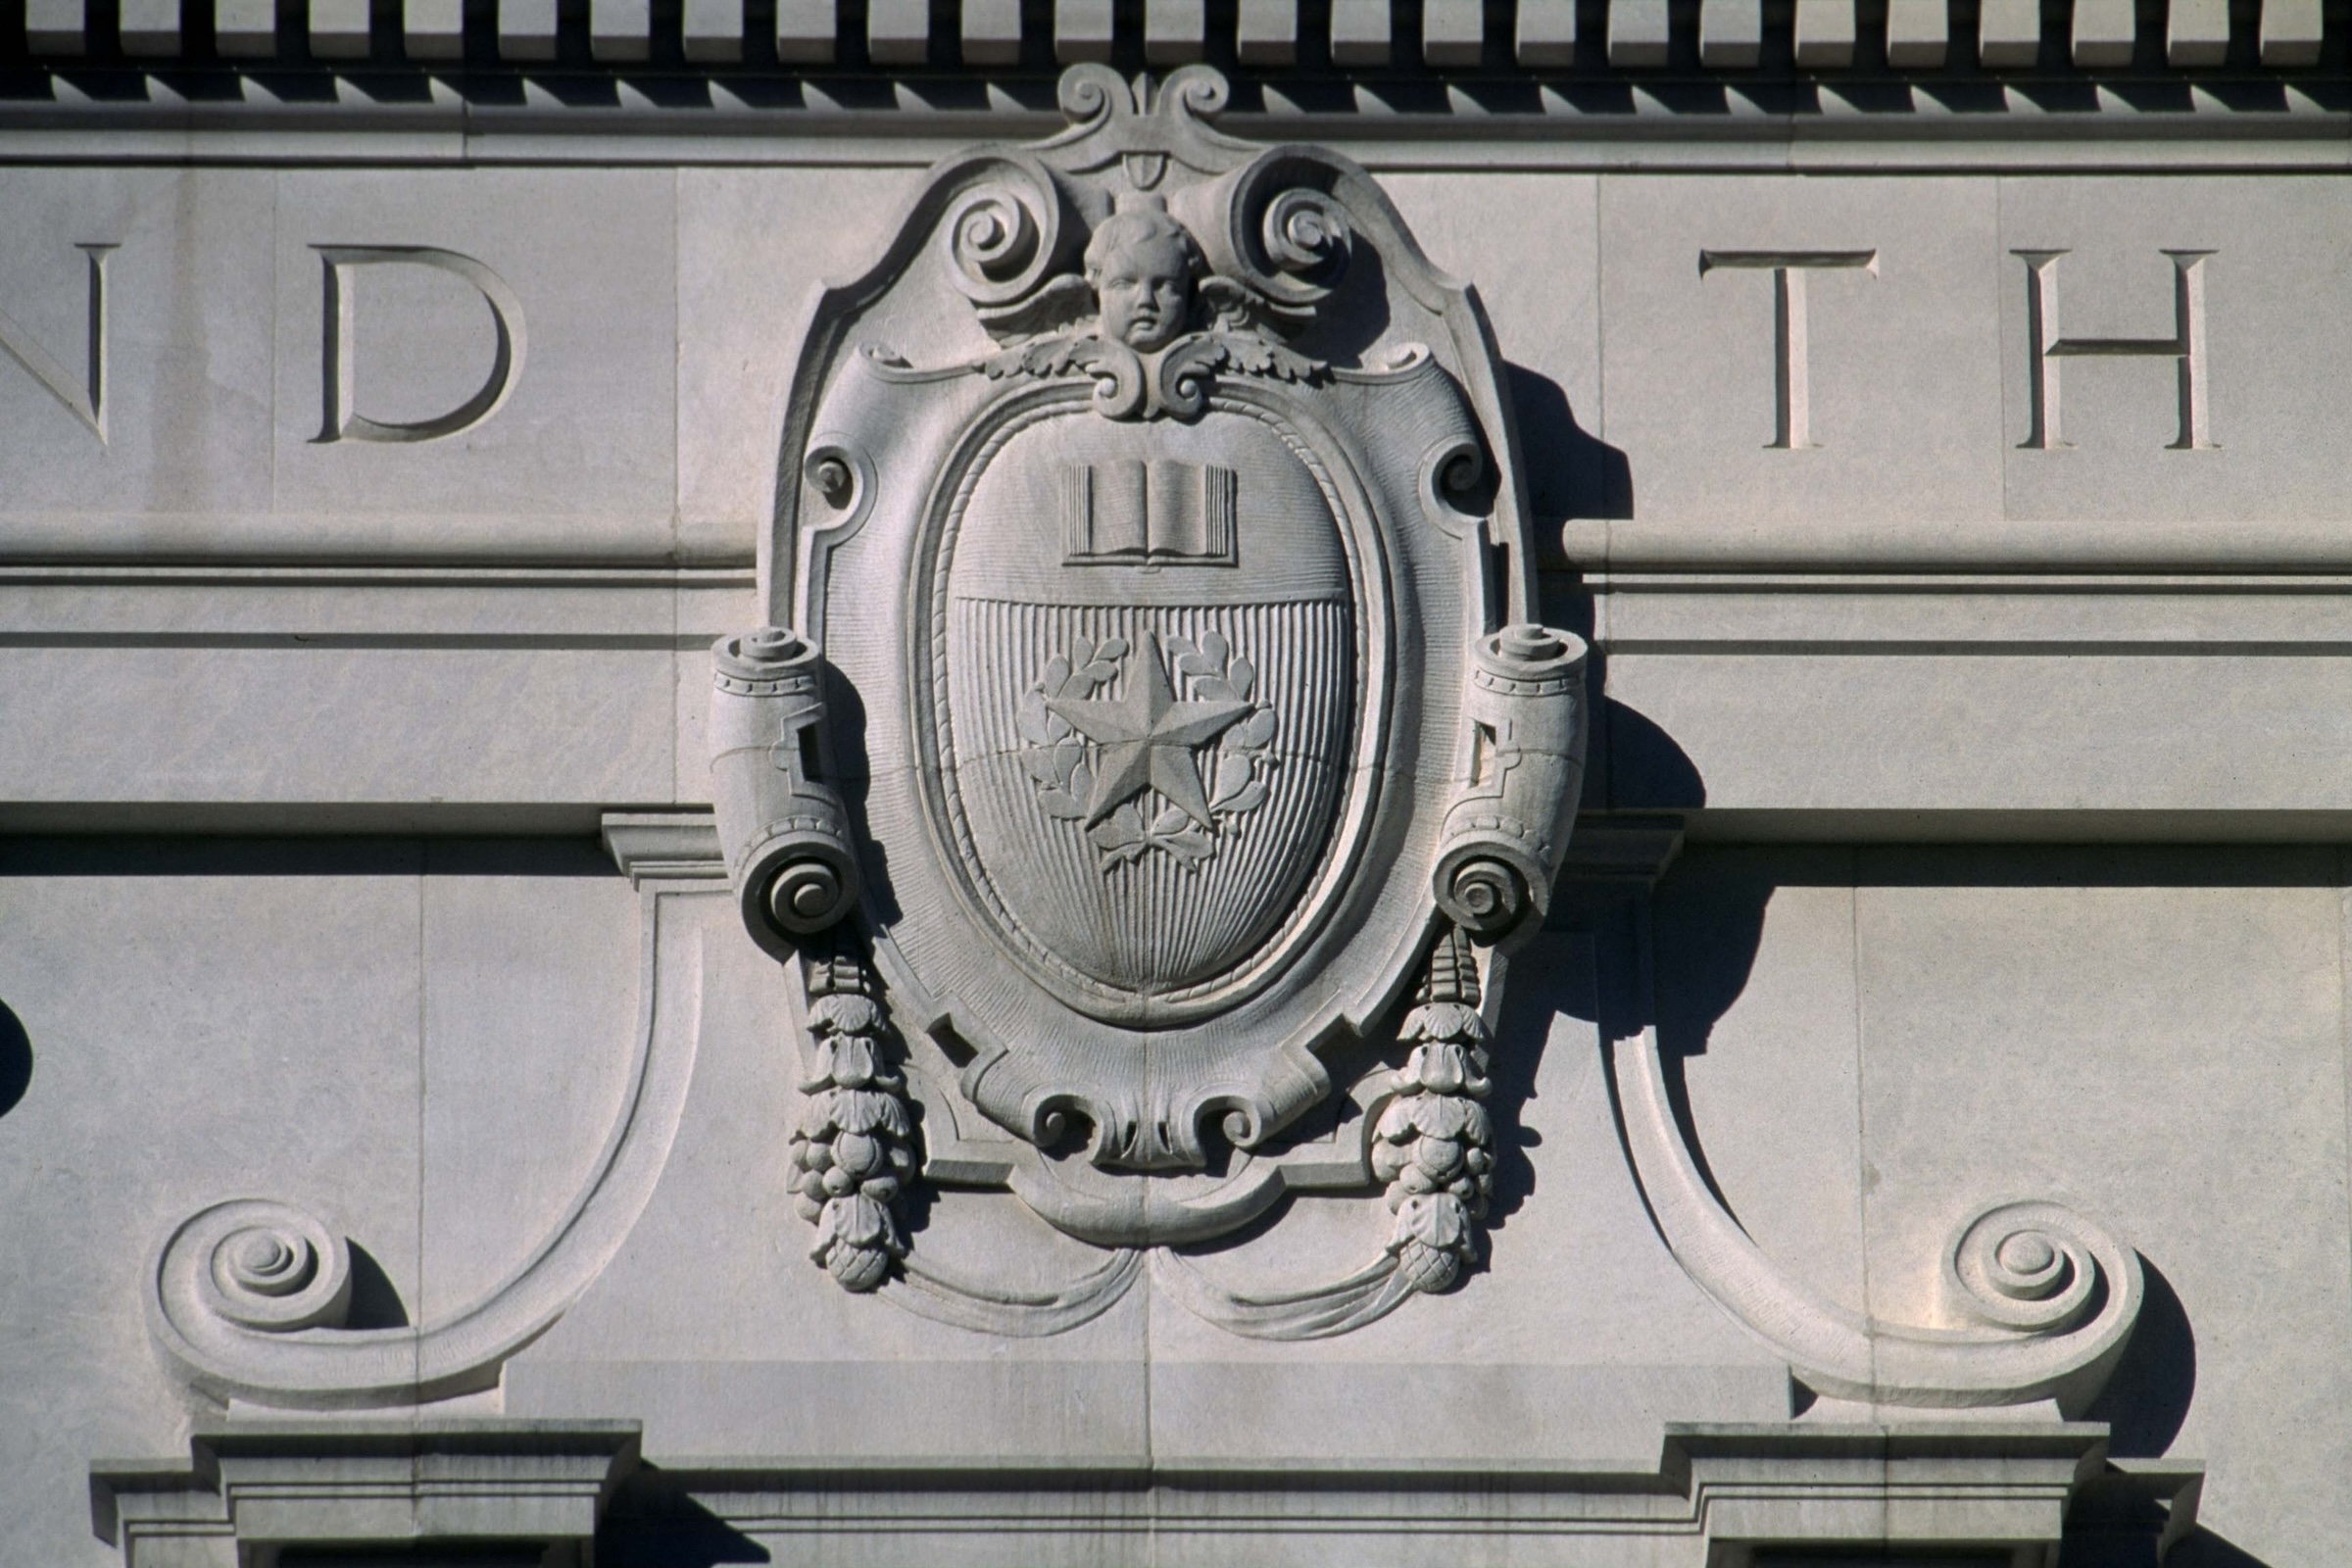 An architectural detail of the University of Texas seal showing a star, book and face cut in limestone on a building